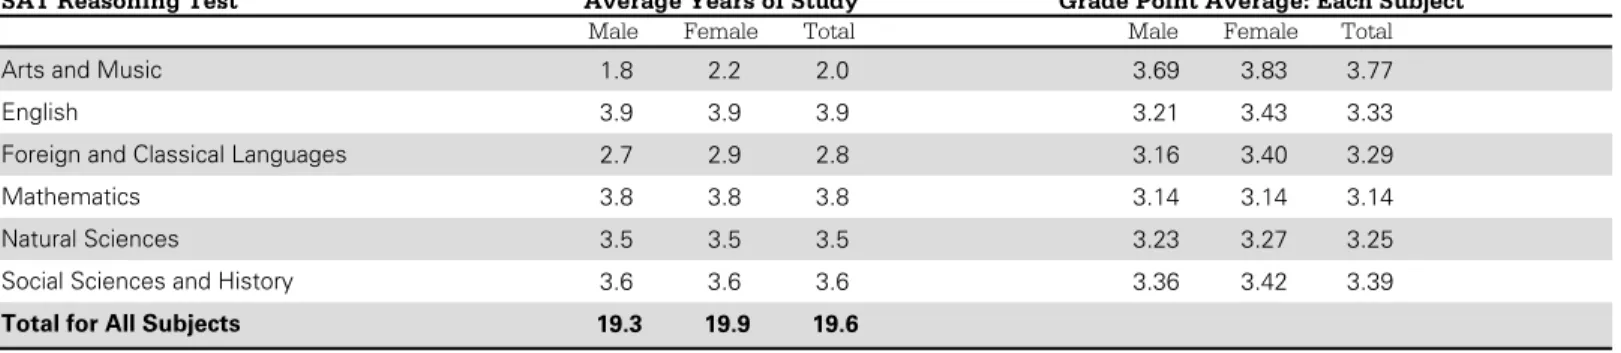 Table 14: Average Years of Study in Six Academic Subjects